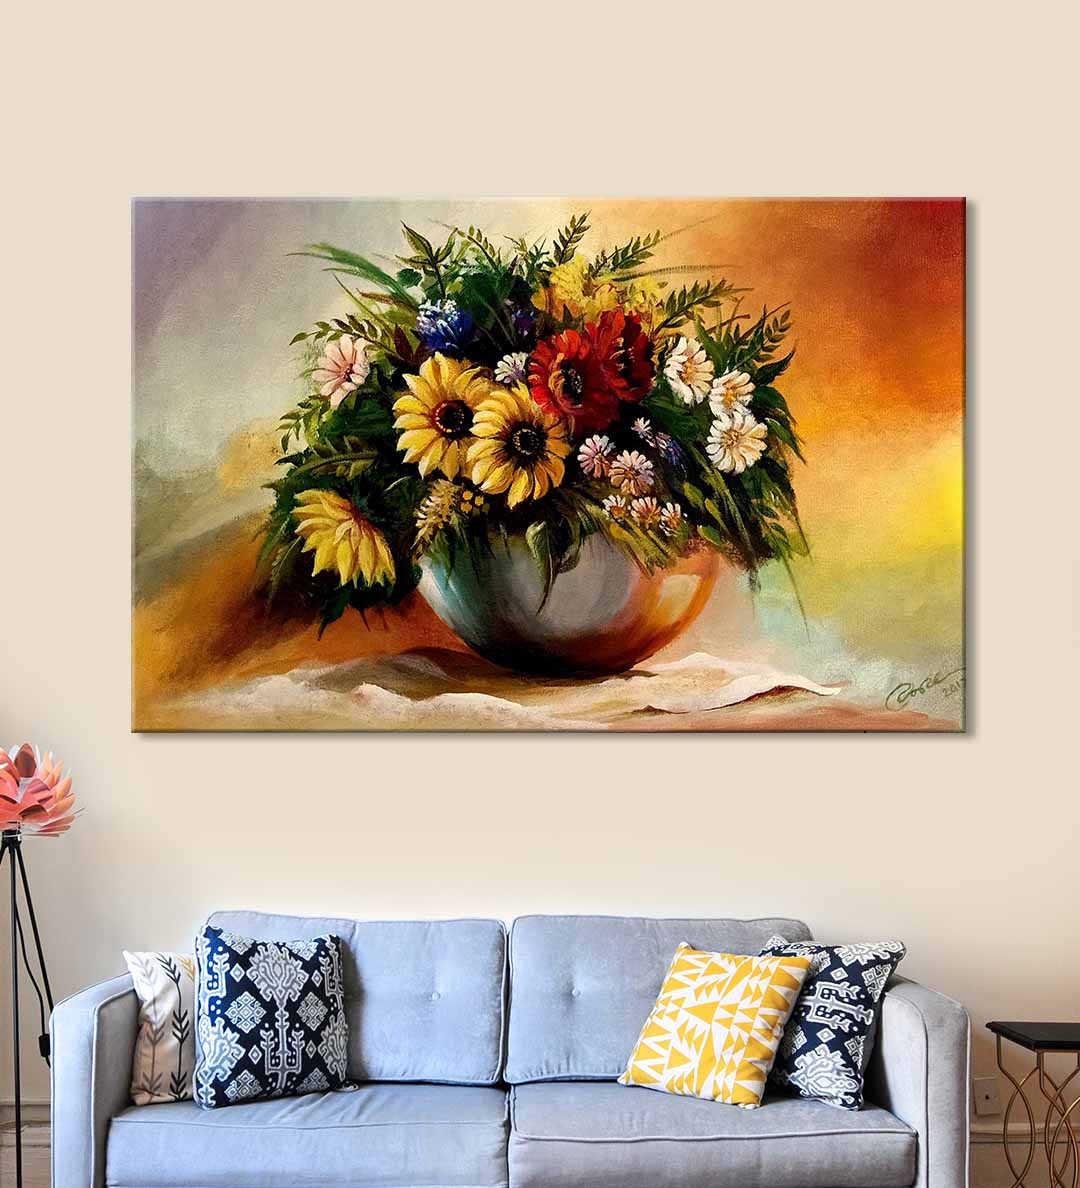 Blooming Flowers - Wall Decor - 1